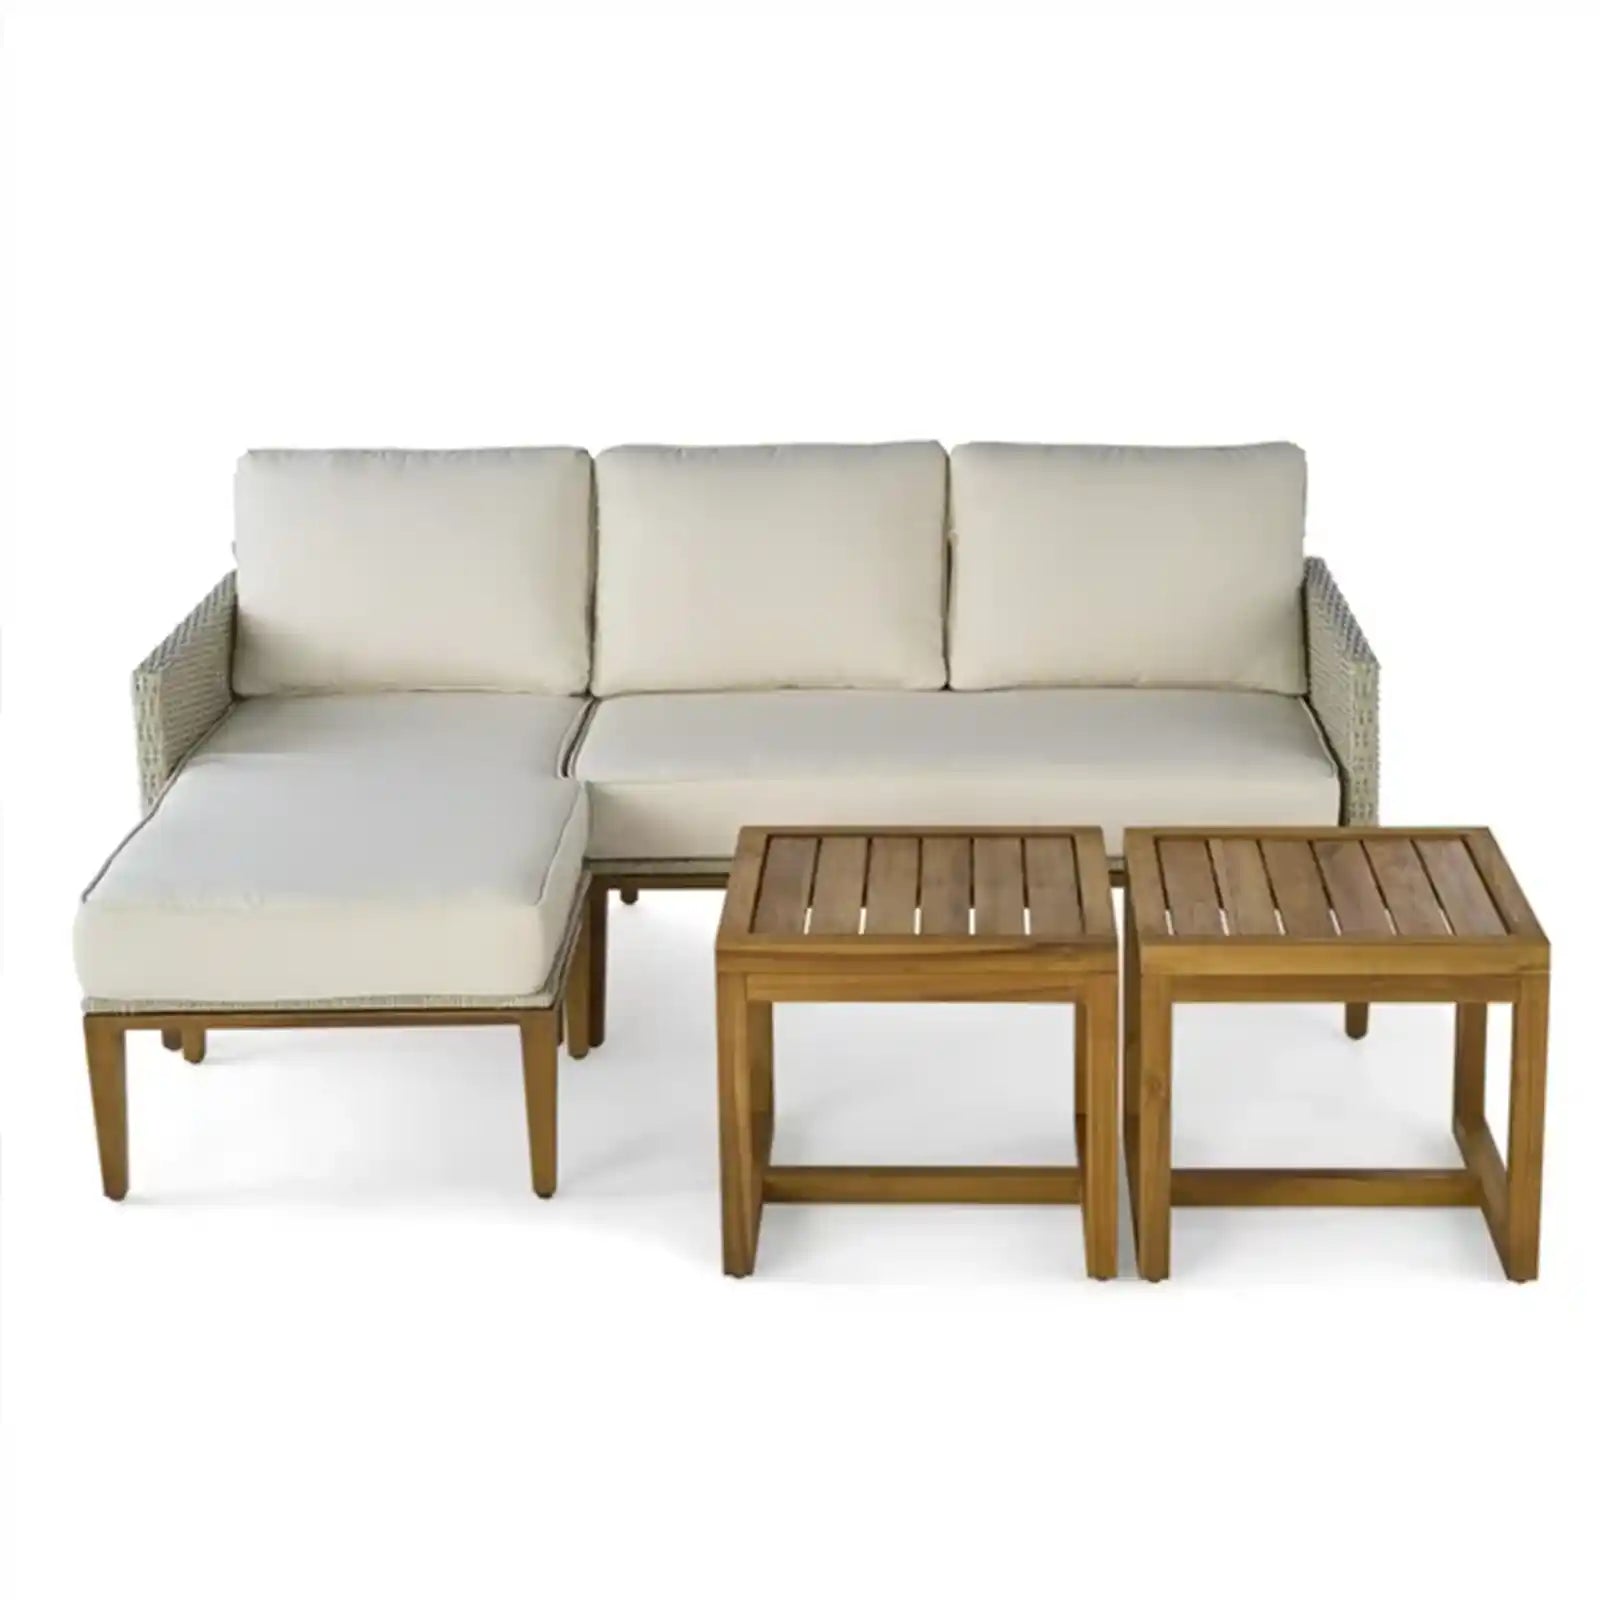 Sofa Lounger with Two Acacia Wood Table with Cushions - White Color